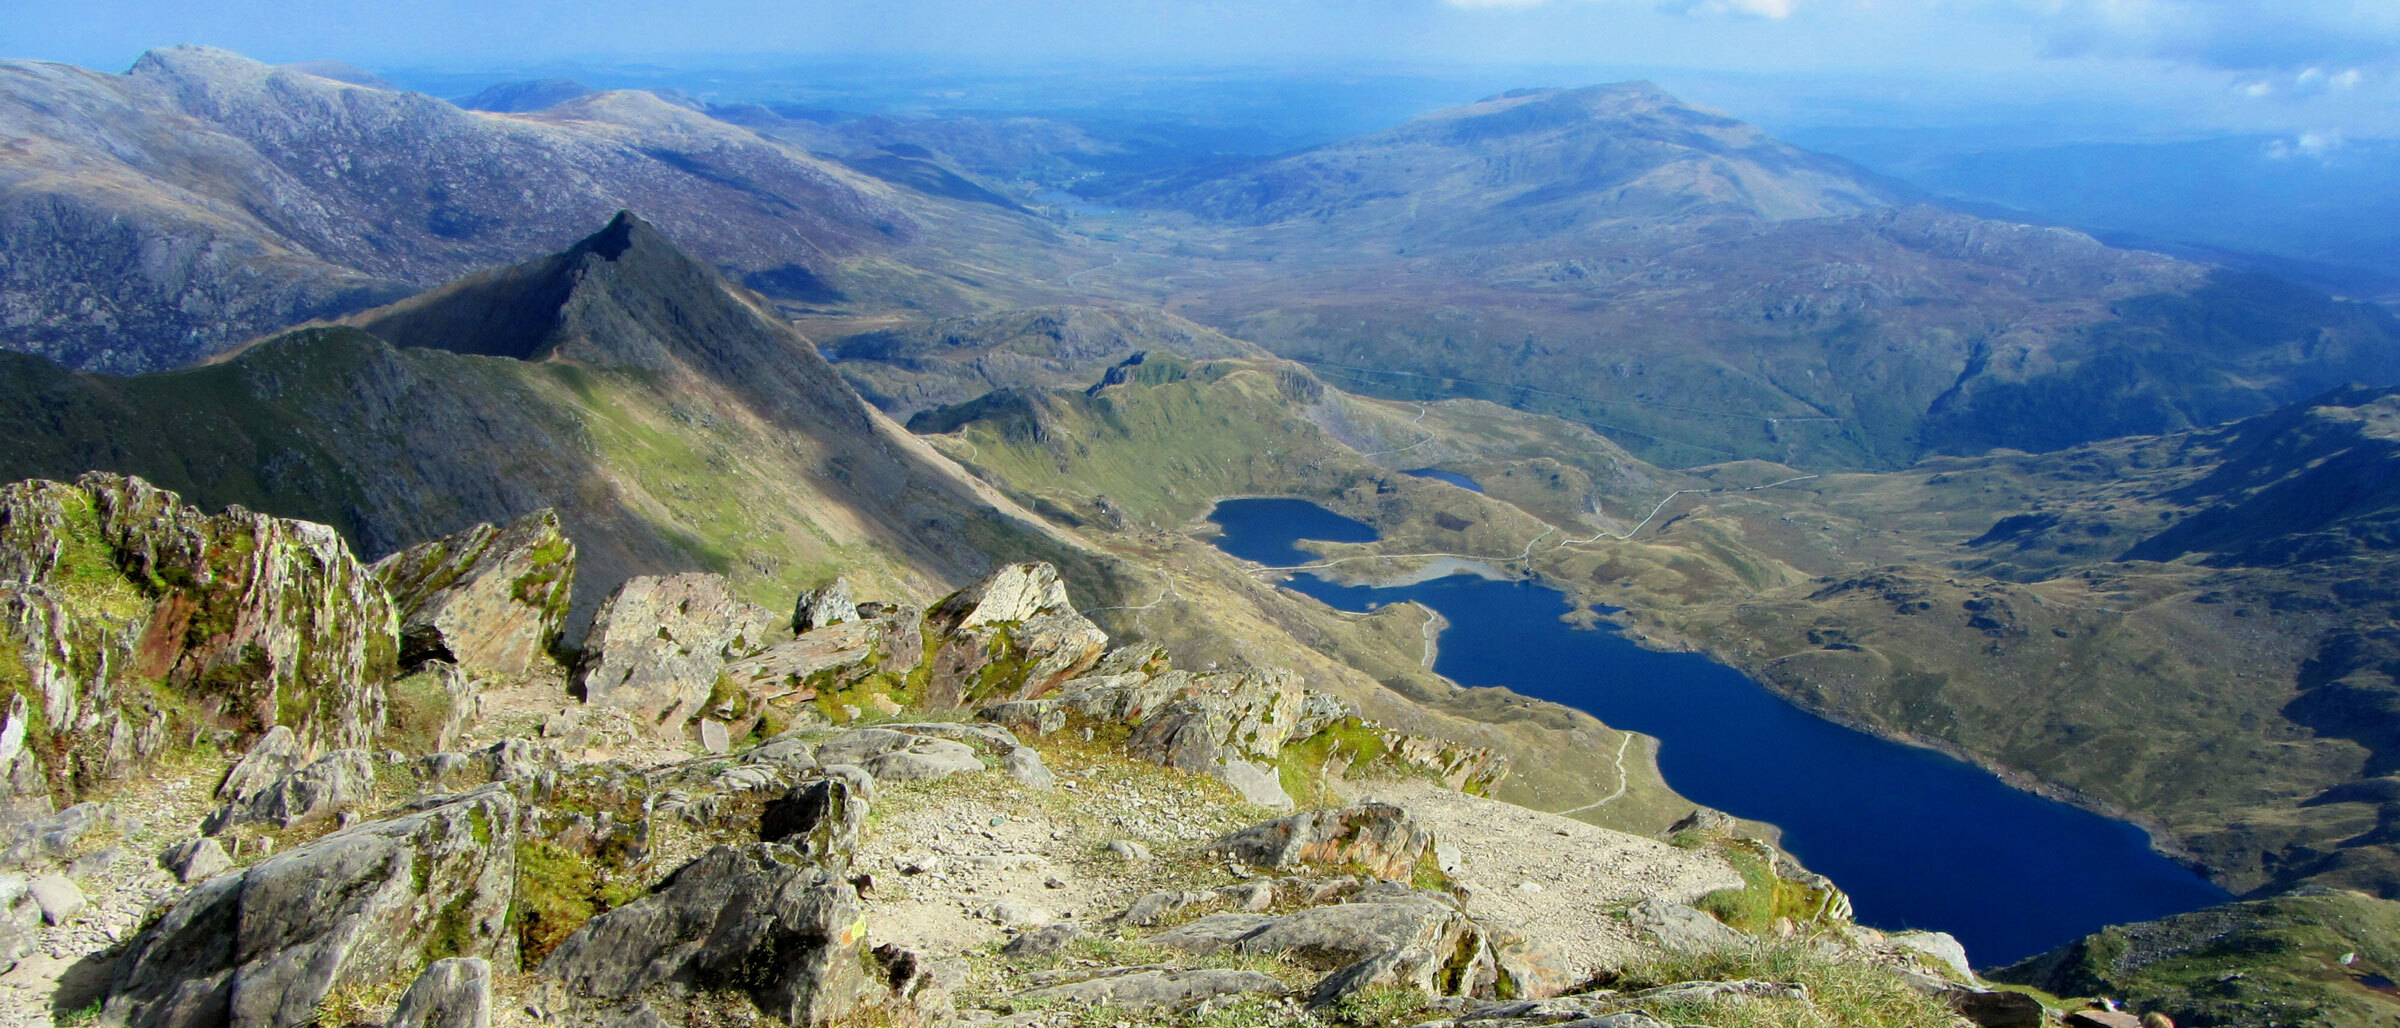 View from the summit of Snowdon